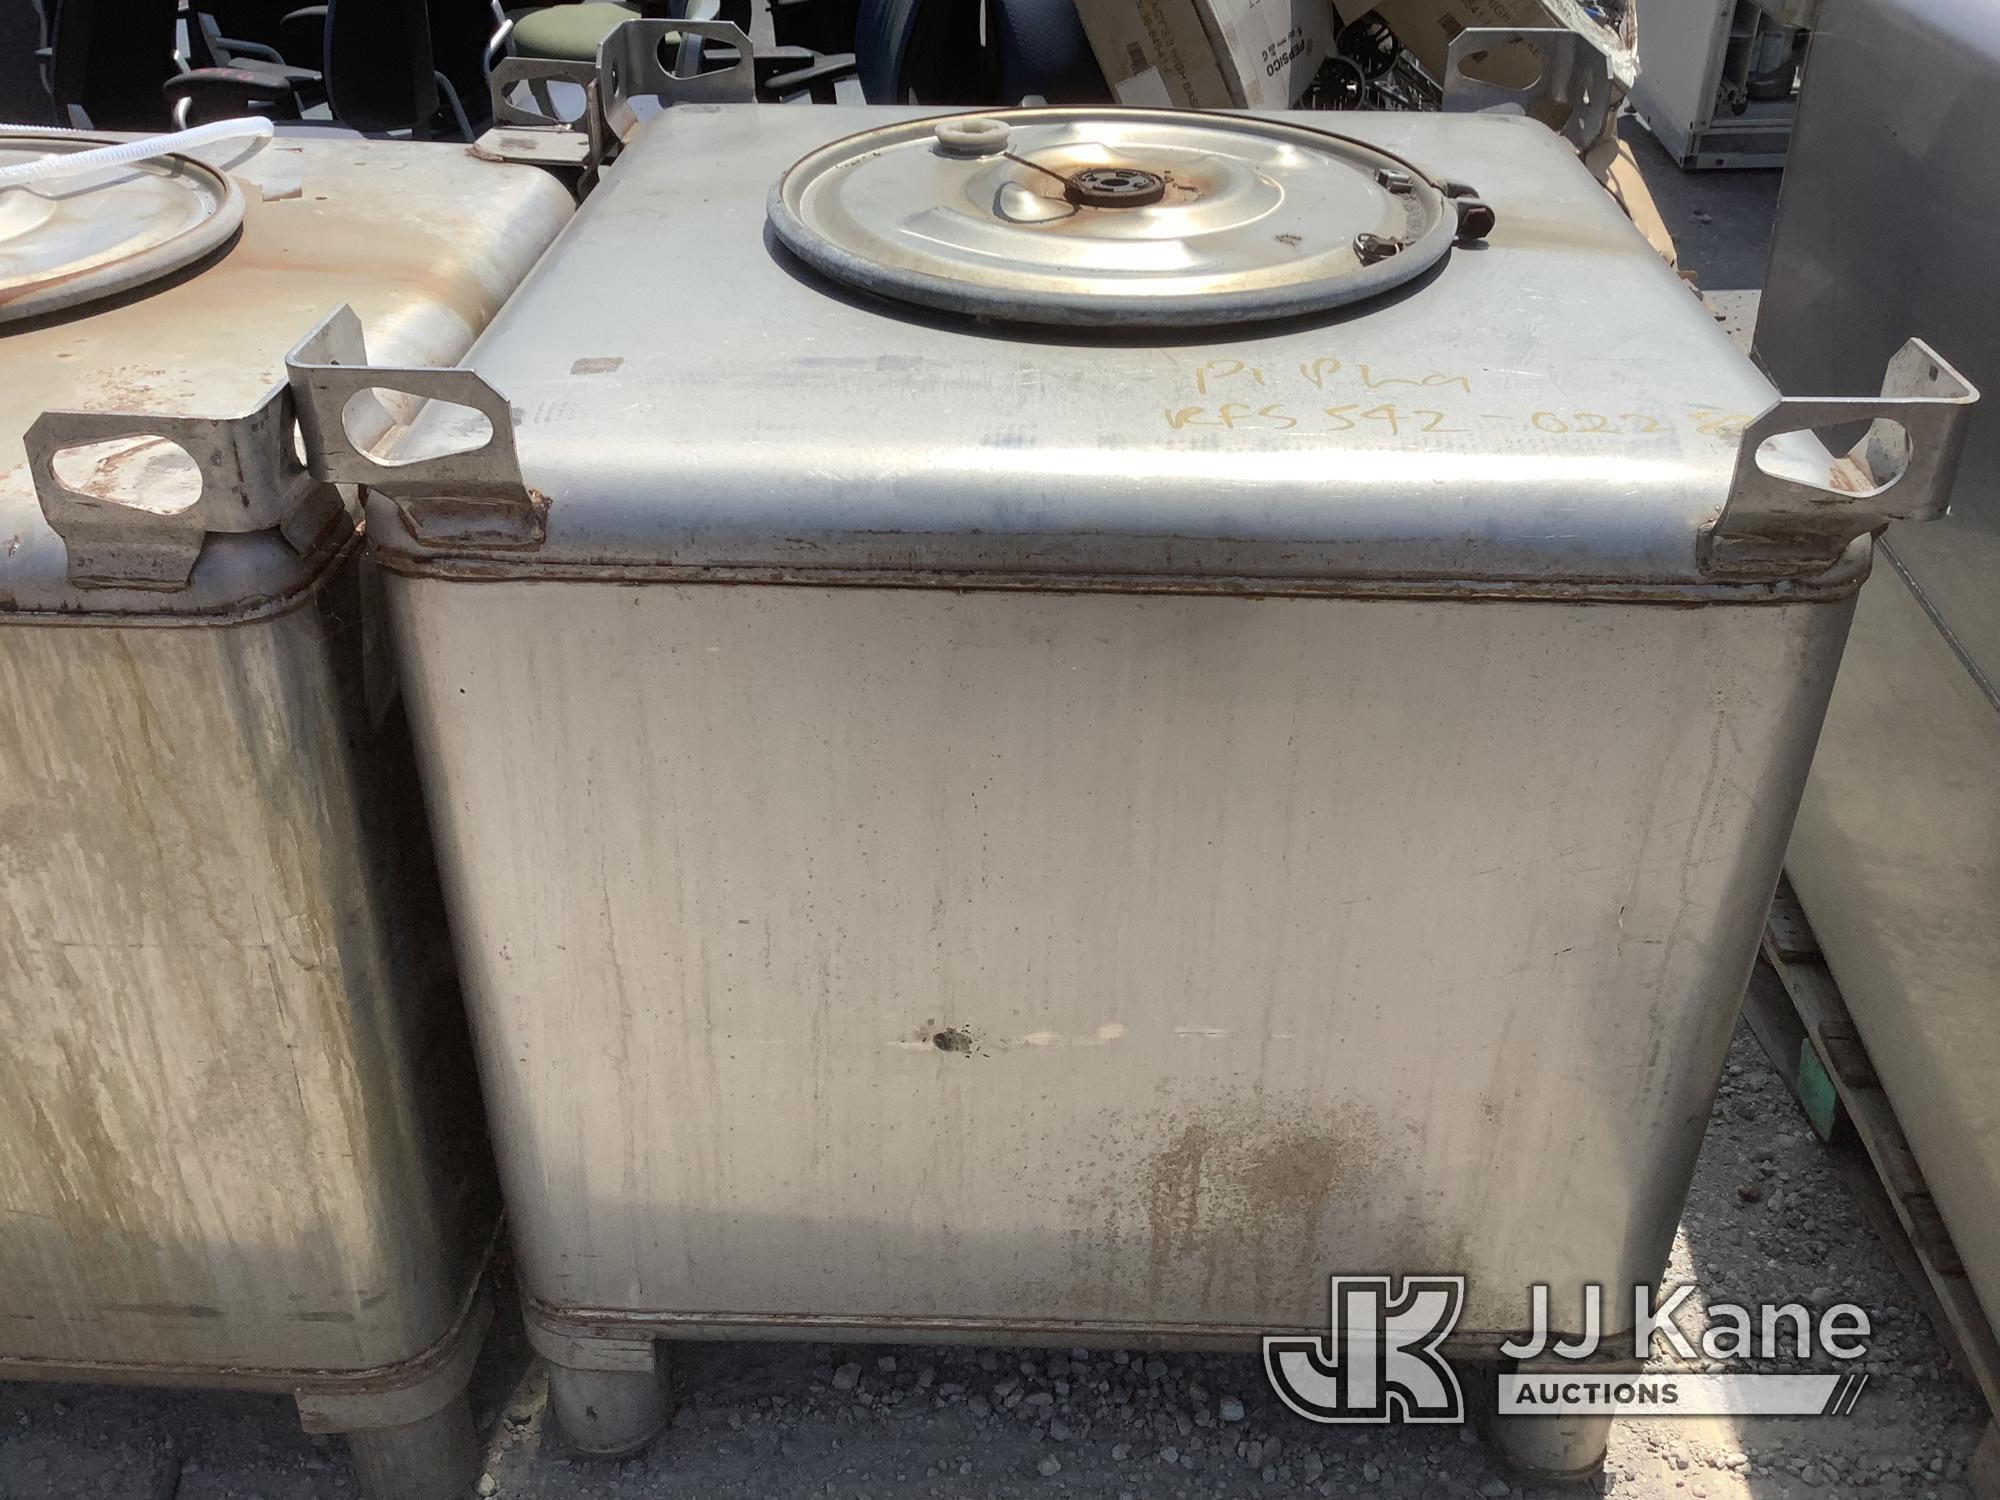 (Jurupa Valley, CA) 3 Clawson Sodium Containers (Used) NOTE: This unit is being sold AS IS/WHERE IS